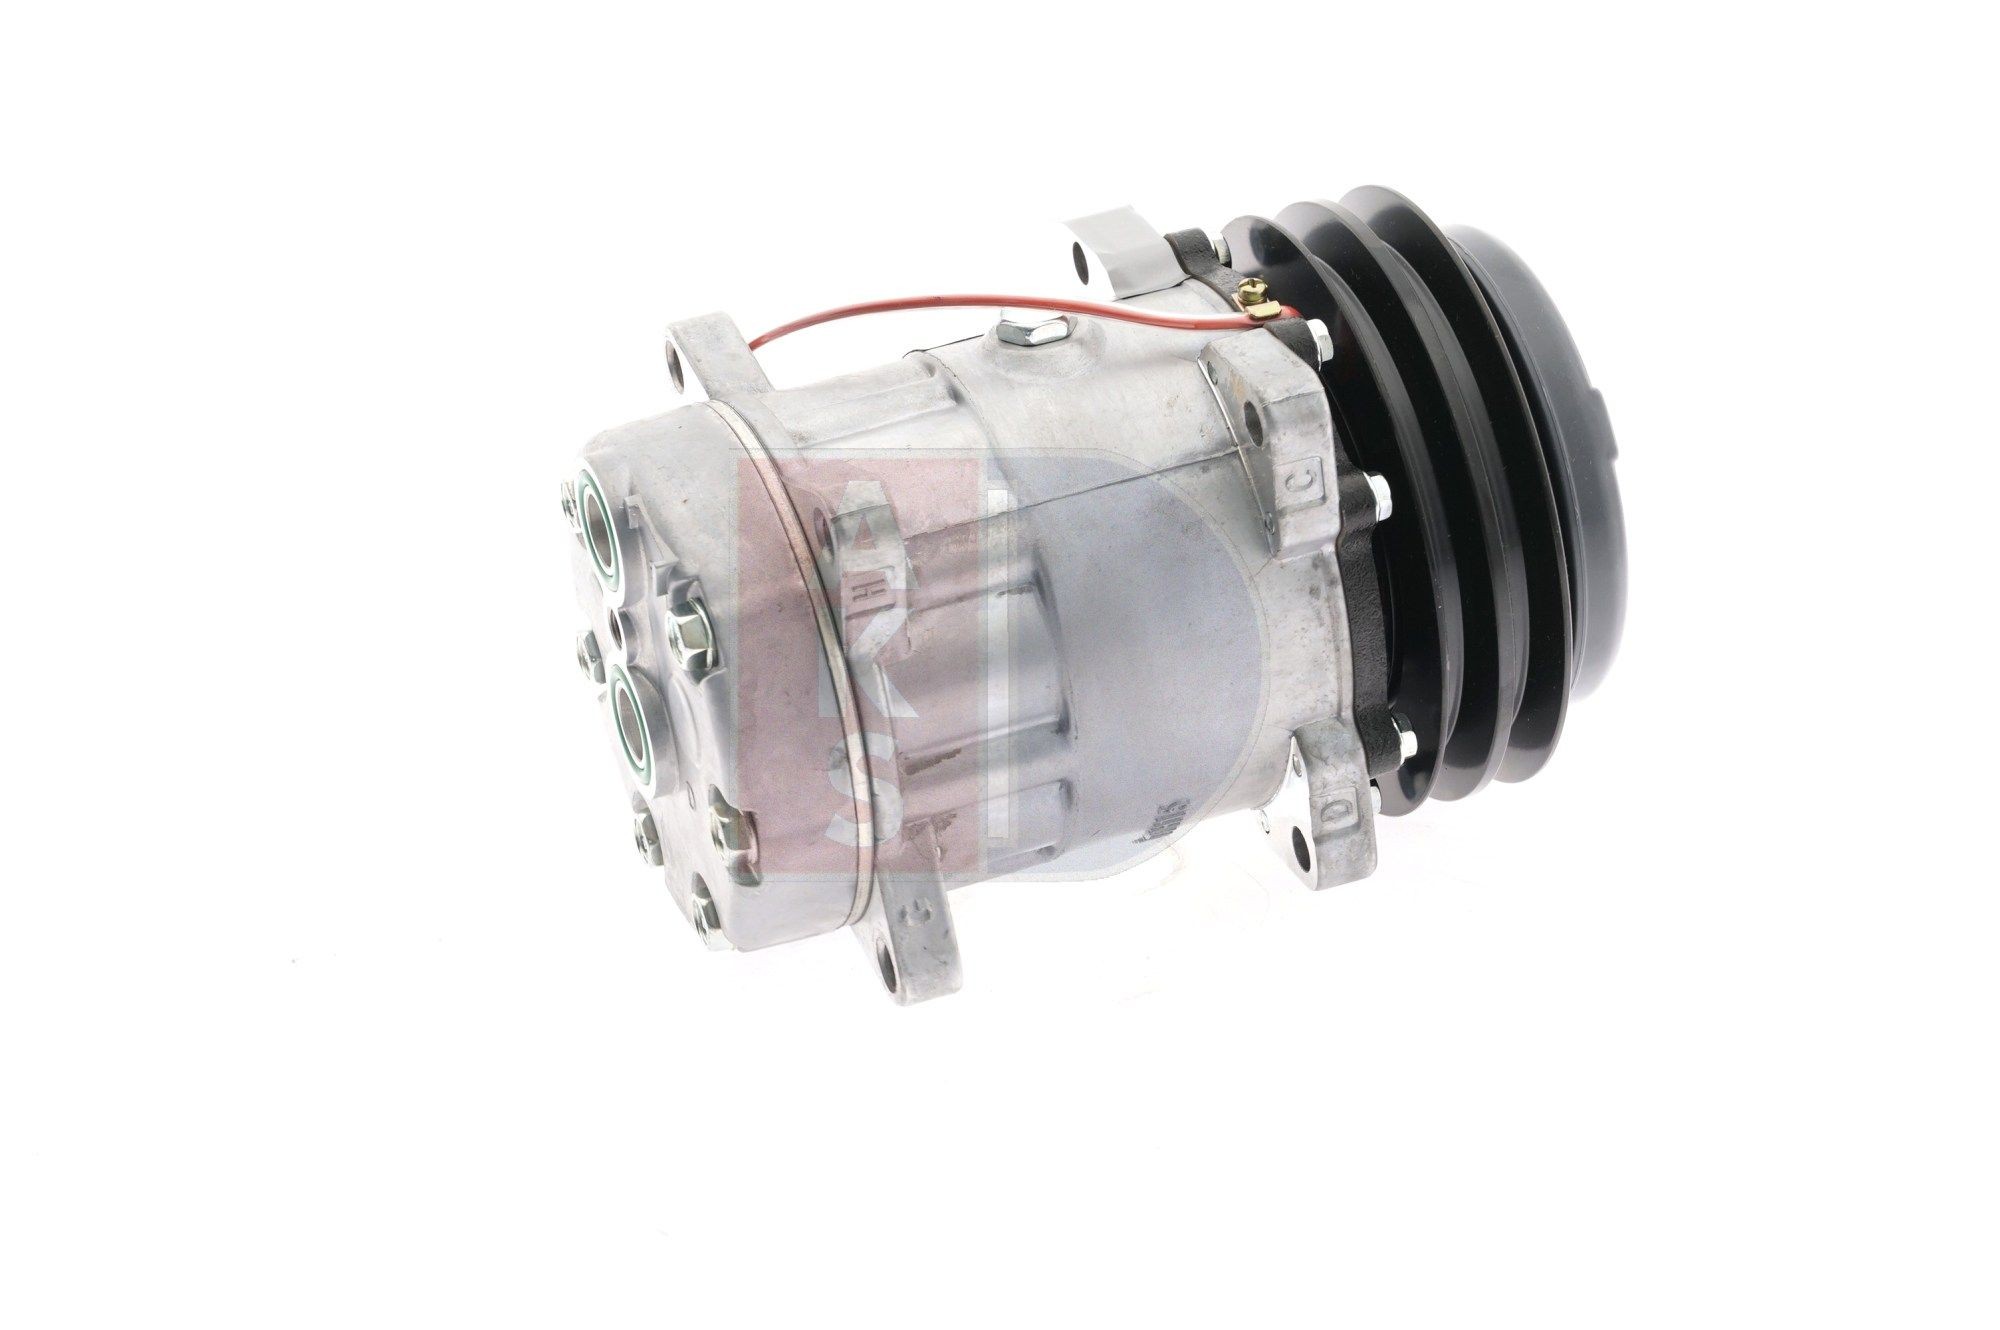 Air conditioning compressor 850883N from AKS DASIS